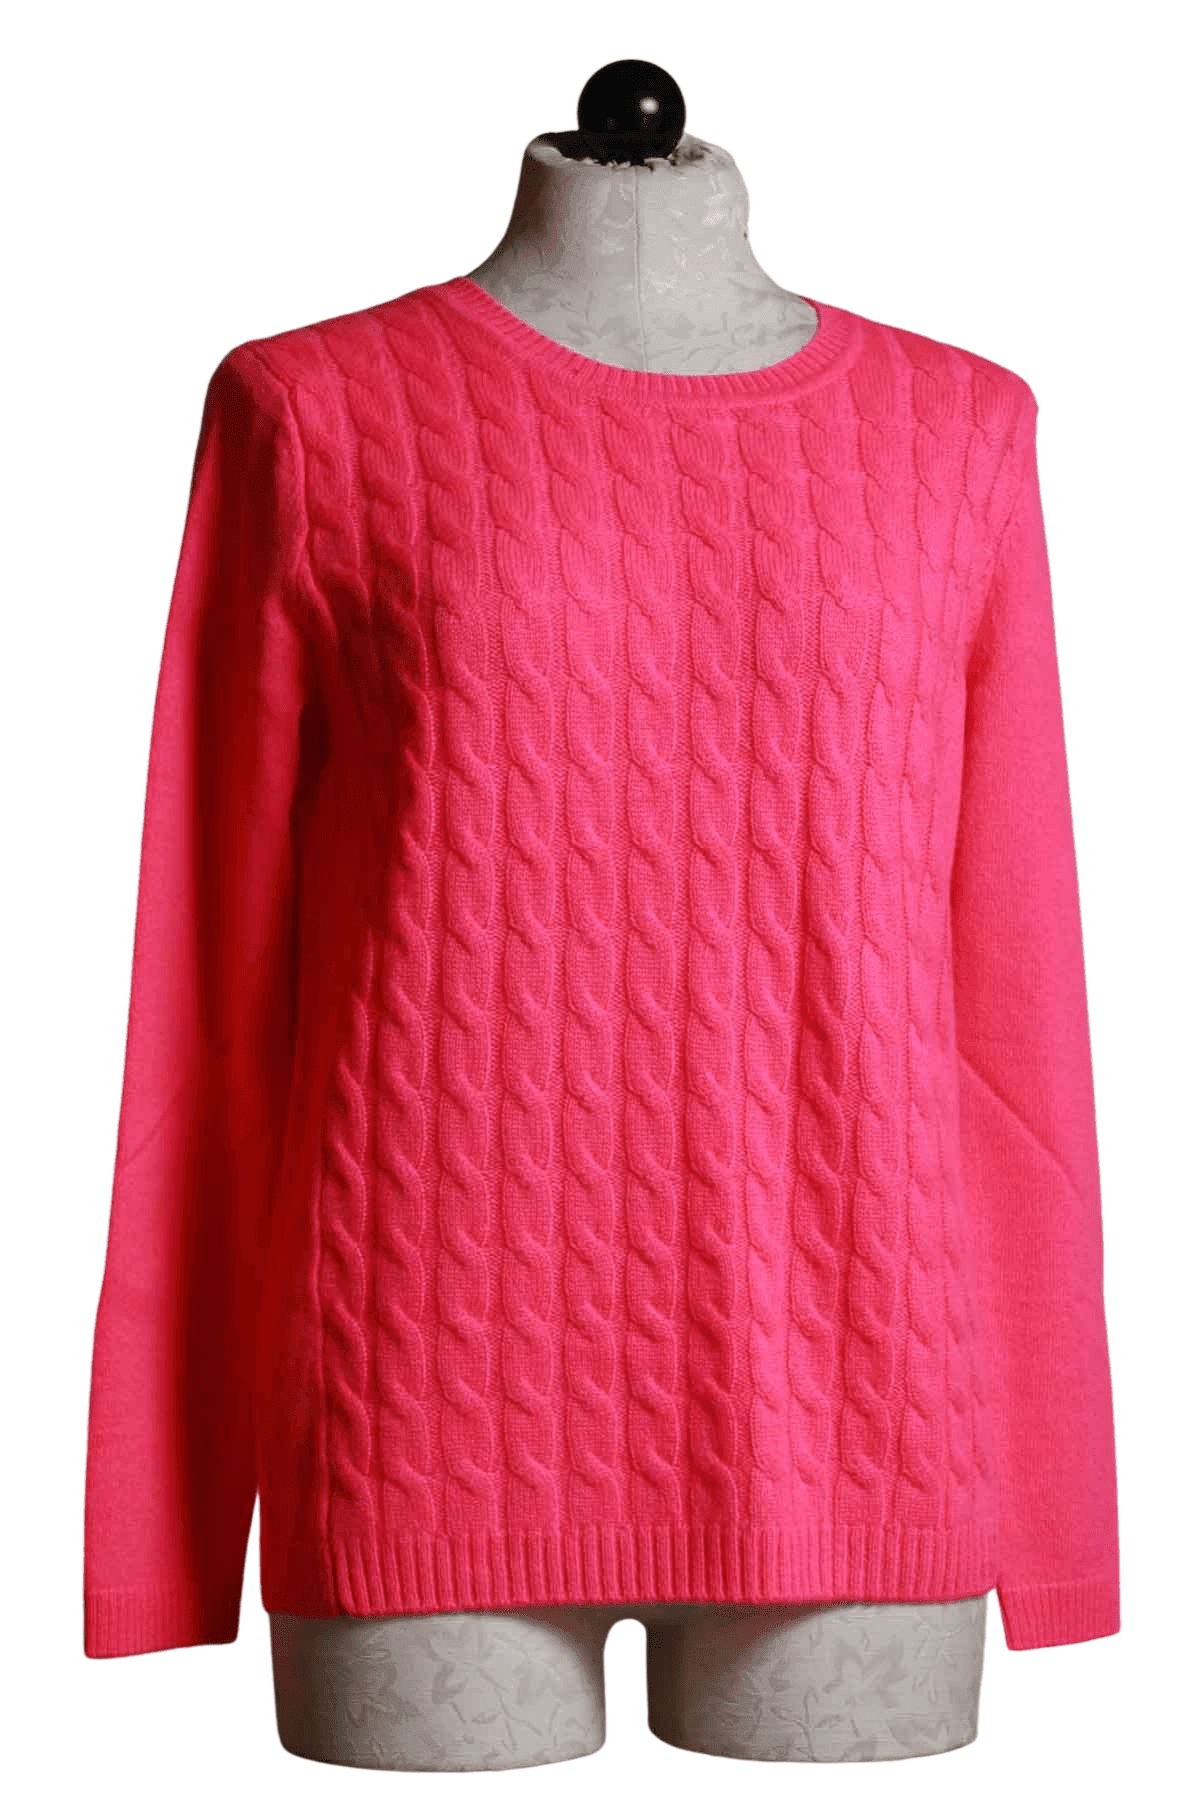 Shocking Pink Classic Cable Crew Neck Sweater by Edinburgh Knitwear